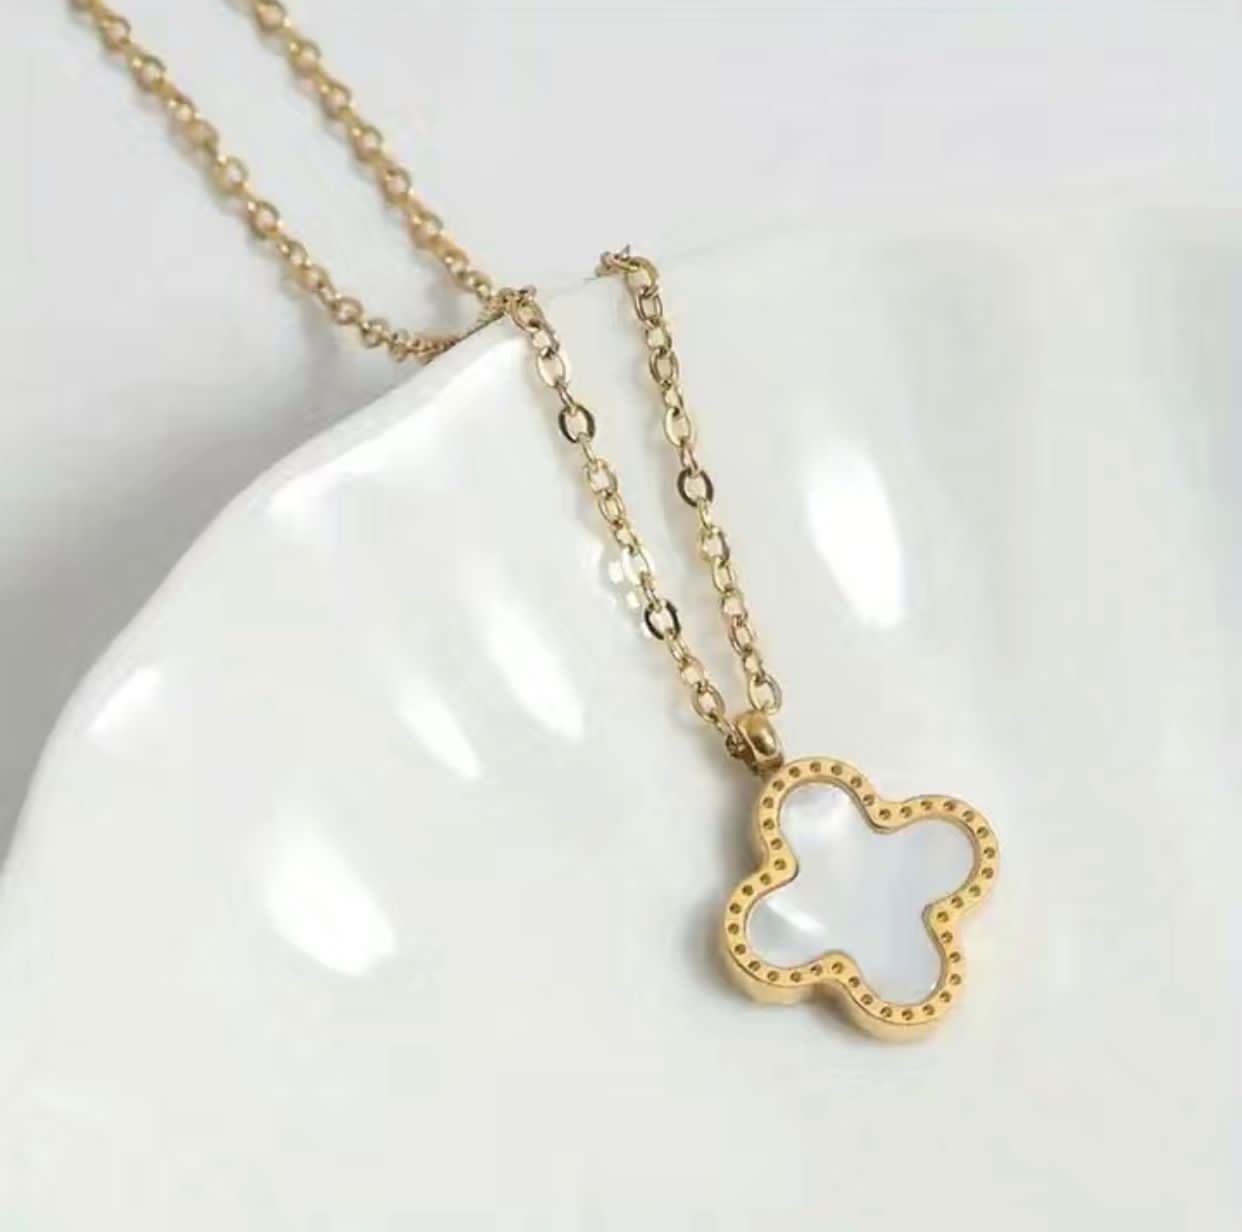 Gold Plated Clover Leaf Necklace with Colored Pendant